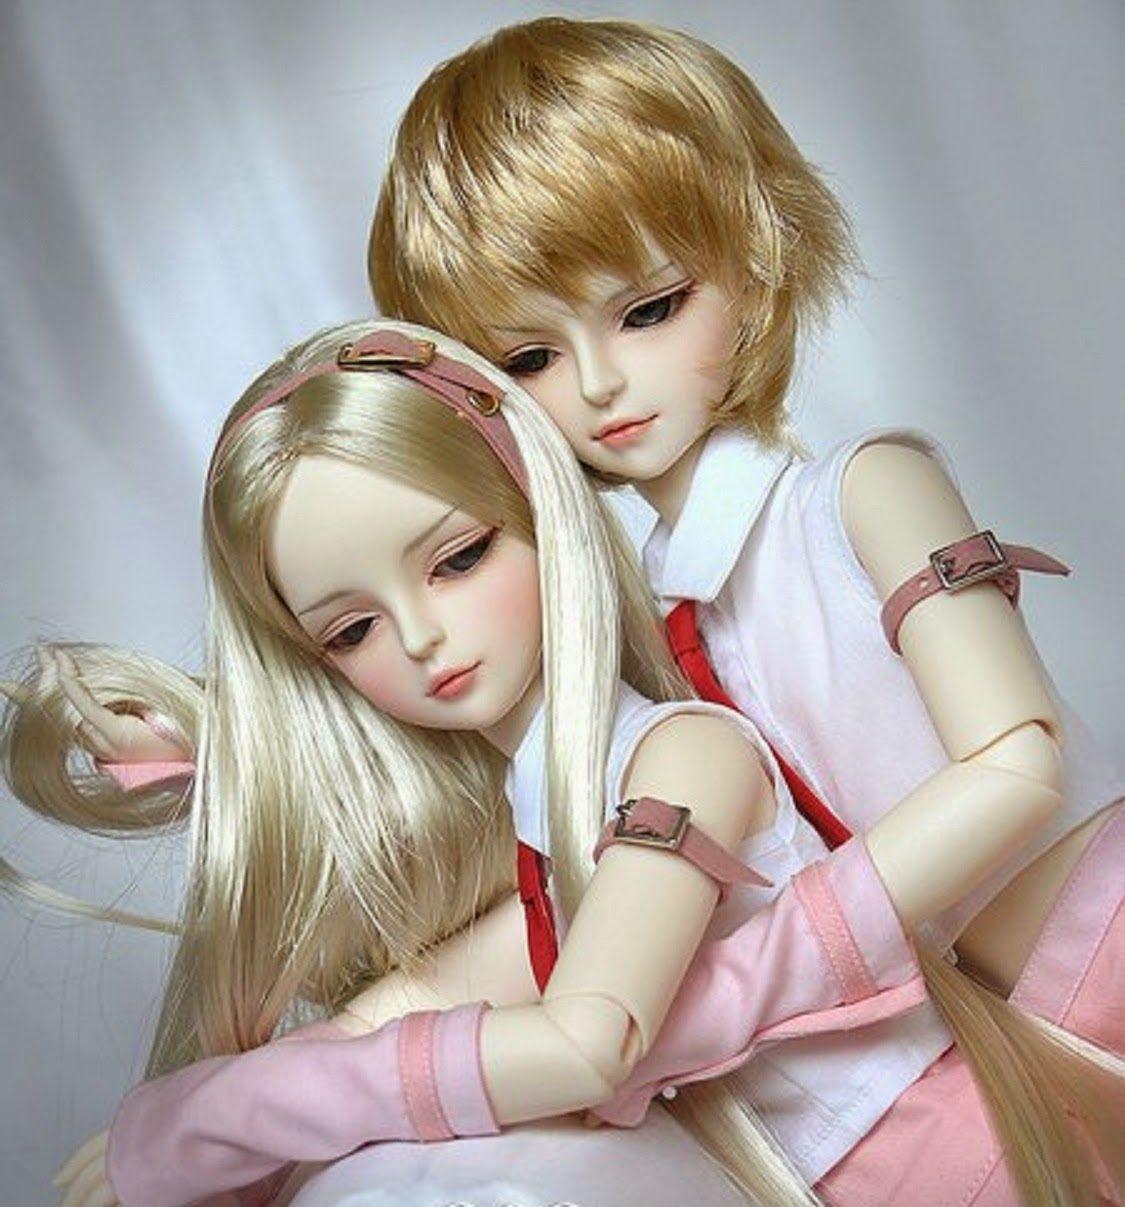 Love Doll Pic Wallpapers - Wallpaper Cave